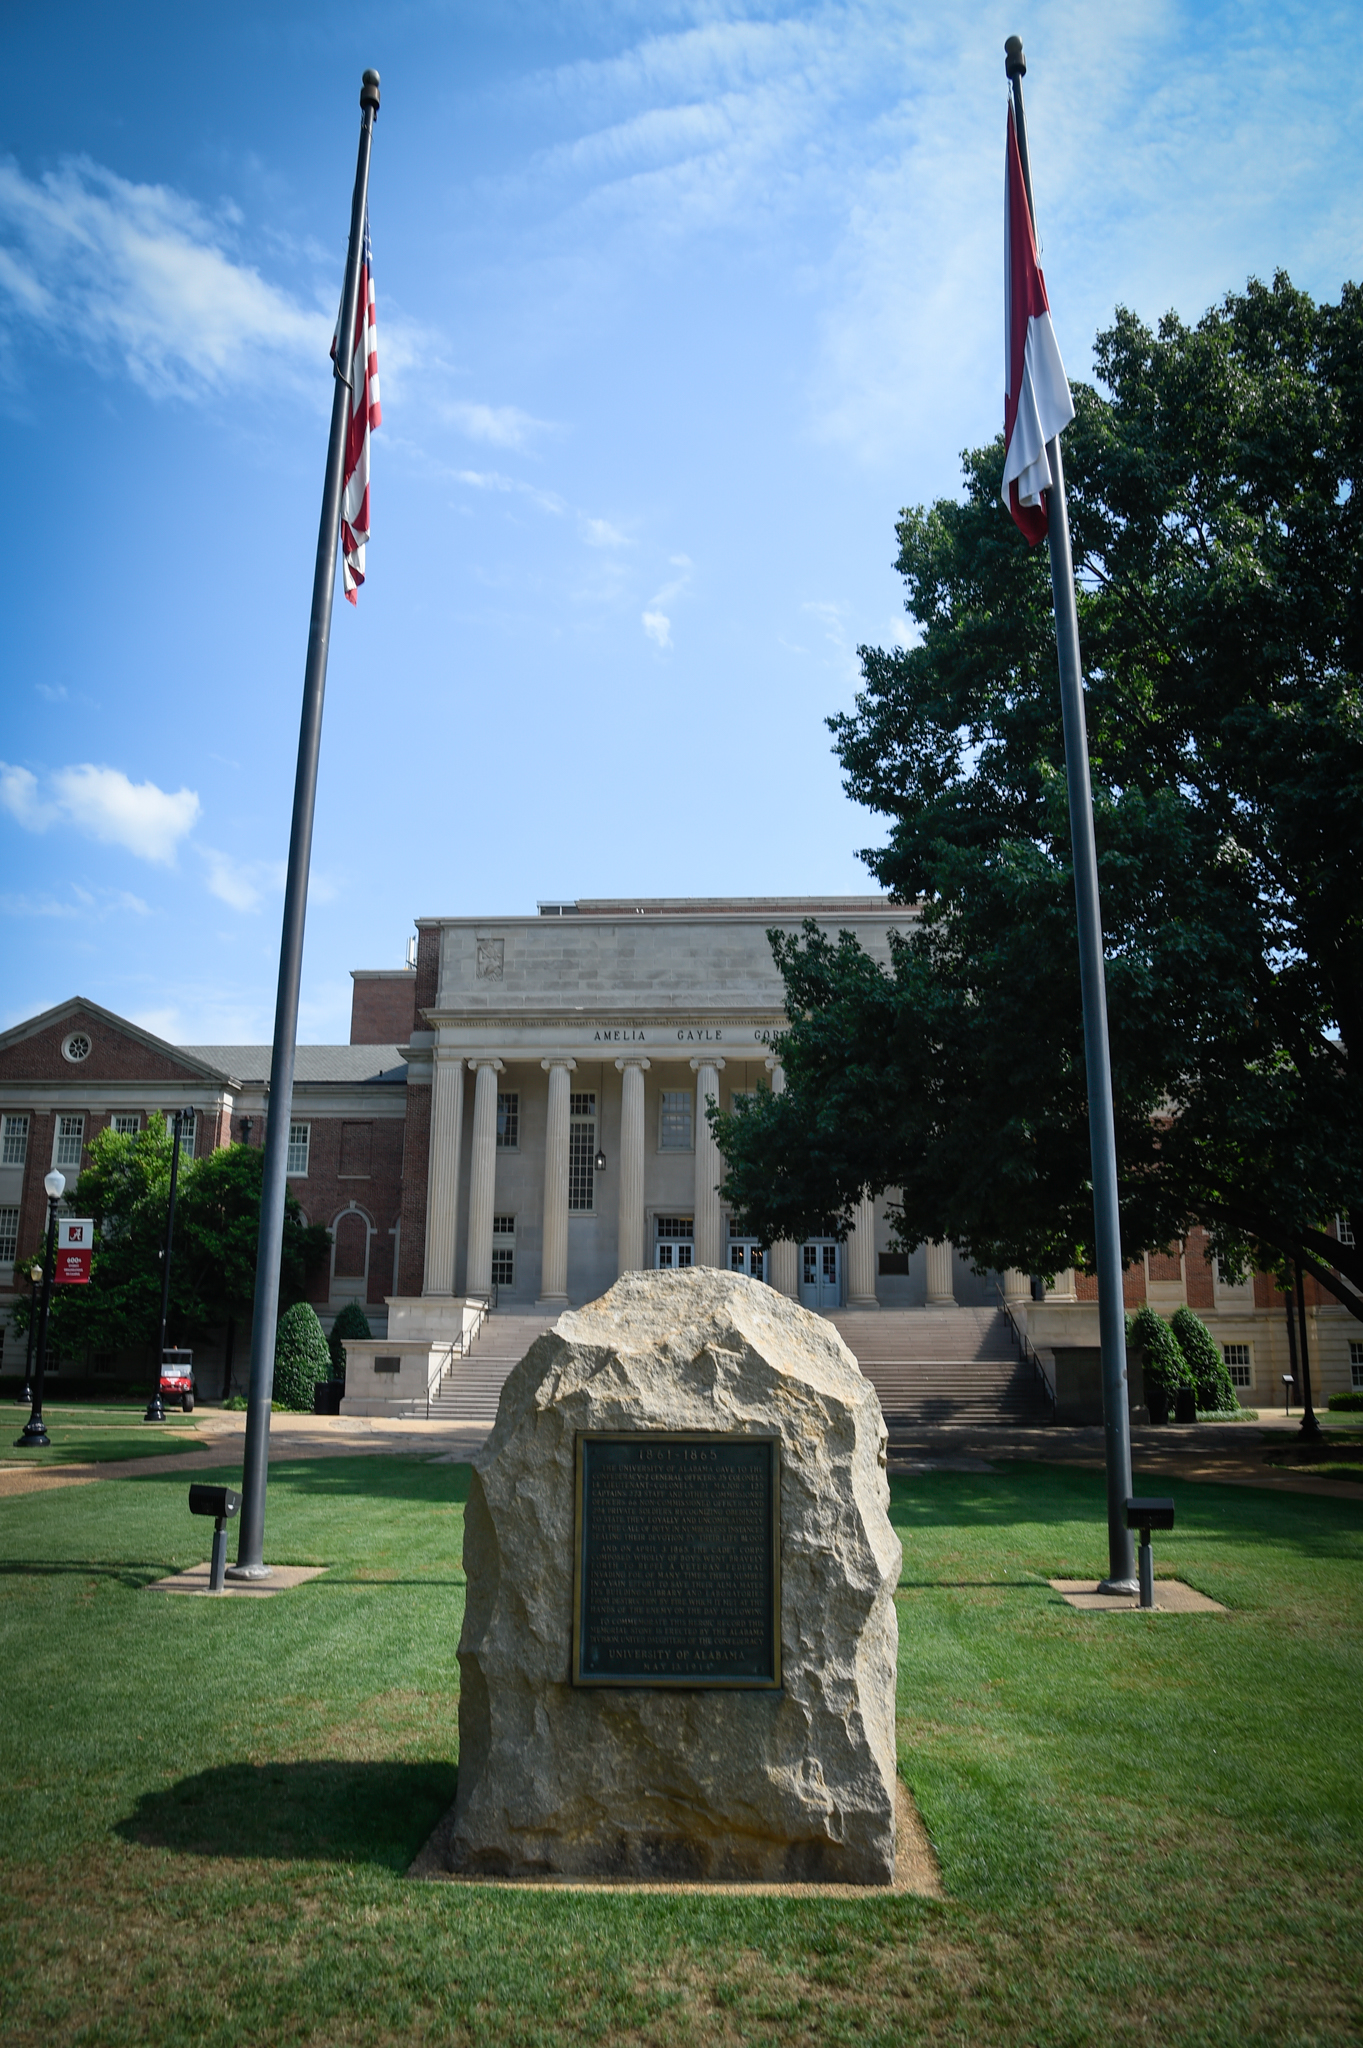 A monument honoring Confederate soldiers, erected by the Alabama Division of the United Daughters of the Confederacy in May 1914, remains at the Center of the Quad between Gorgas Library and Denny Chimes on the University of Alabama campus. Photo taken Wednesday, June 3, 2020. (Ben Flanagan / AL.com)